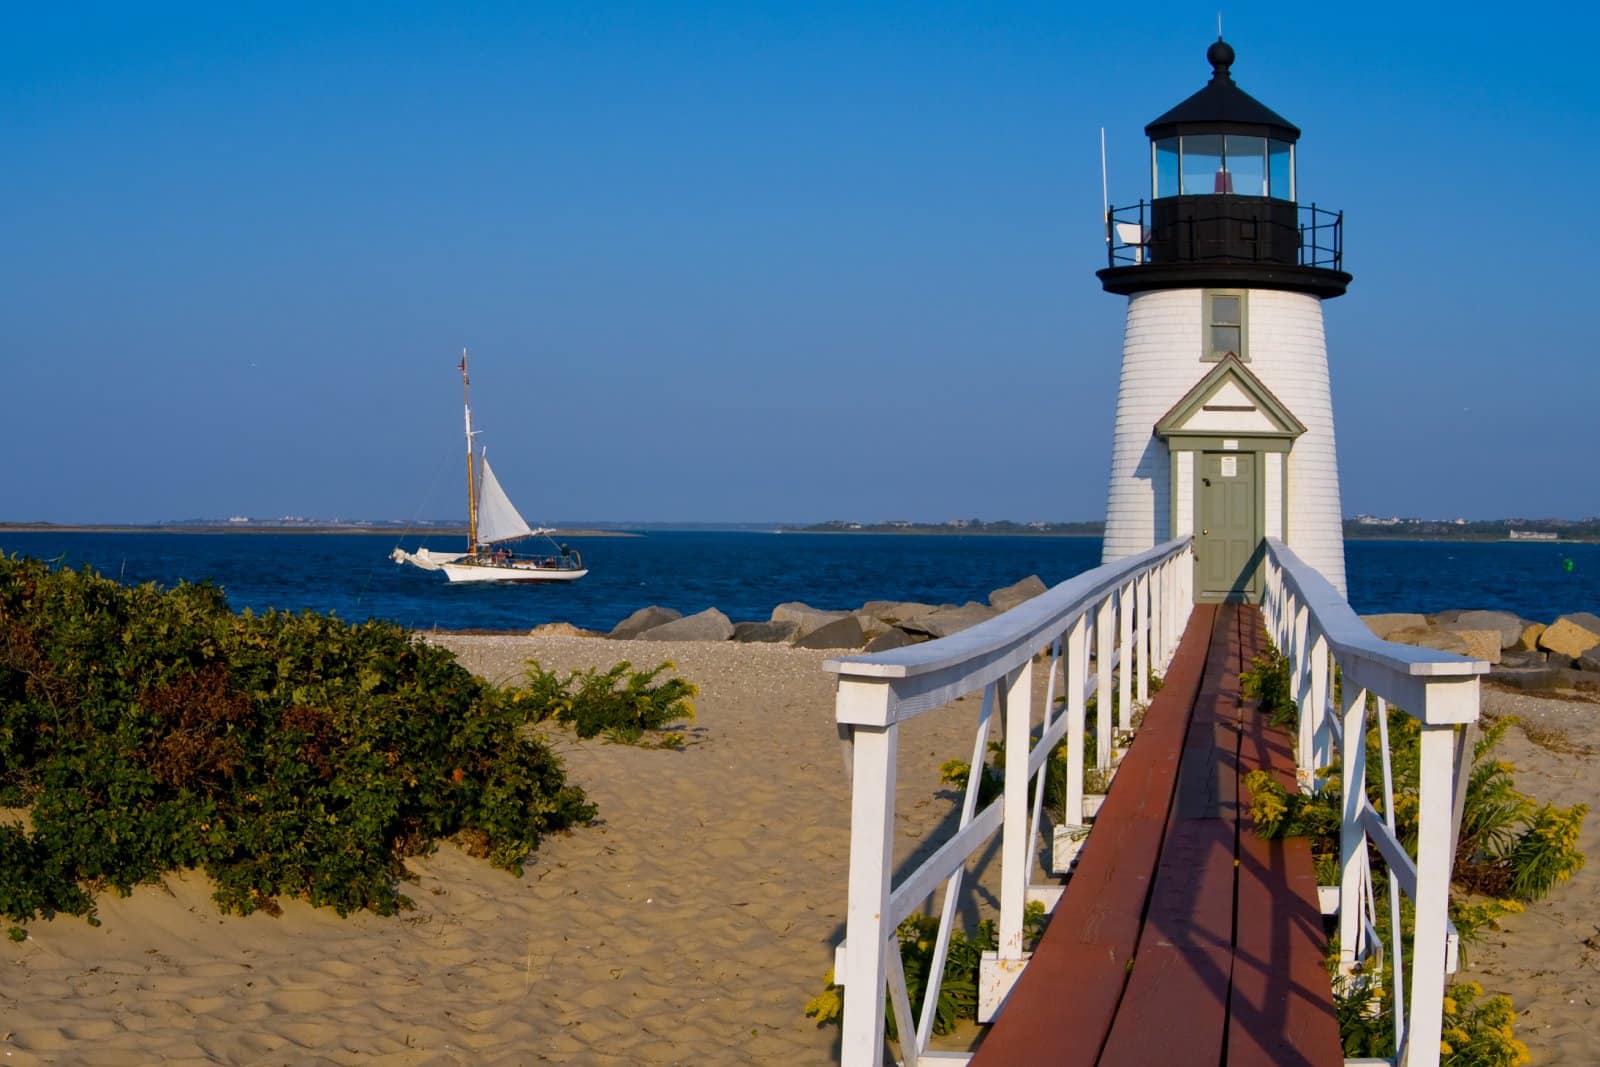 <p><span>Relax on the sandy shores of Cape Cod, with its charming seaside villages, lighthouses, and fresh seafood that evoke the coastal charm of New England and the Maritime provinces.</span></p>